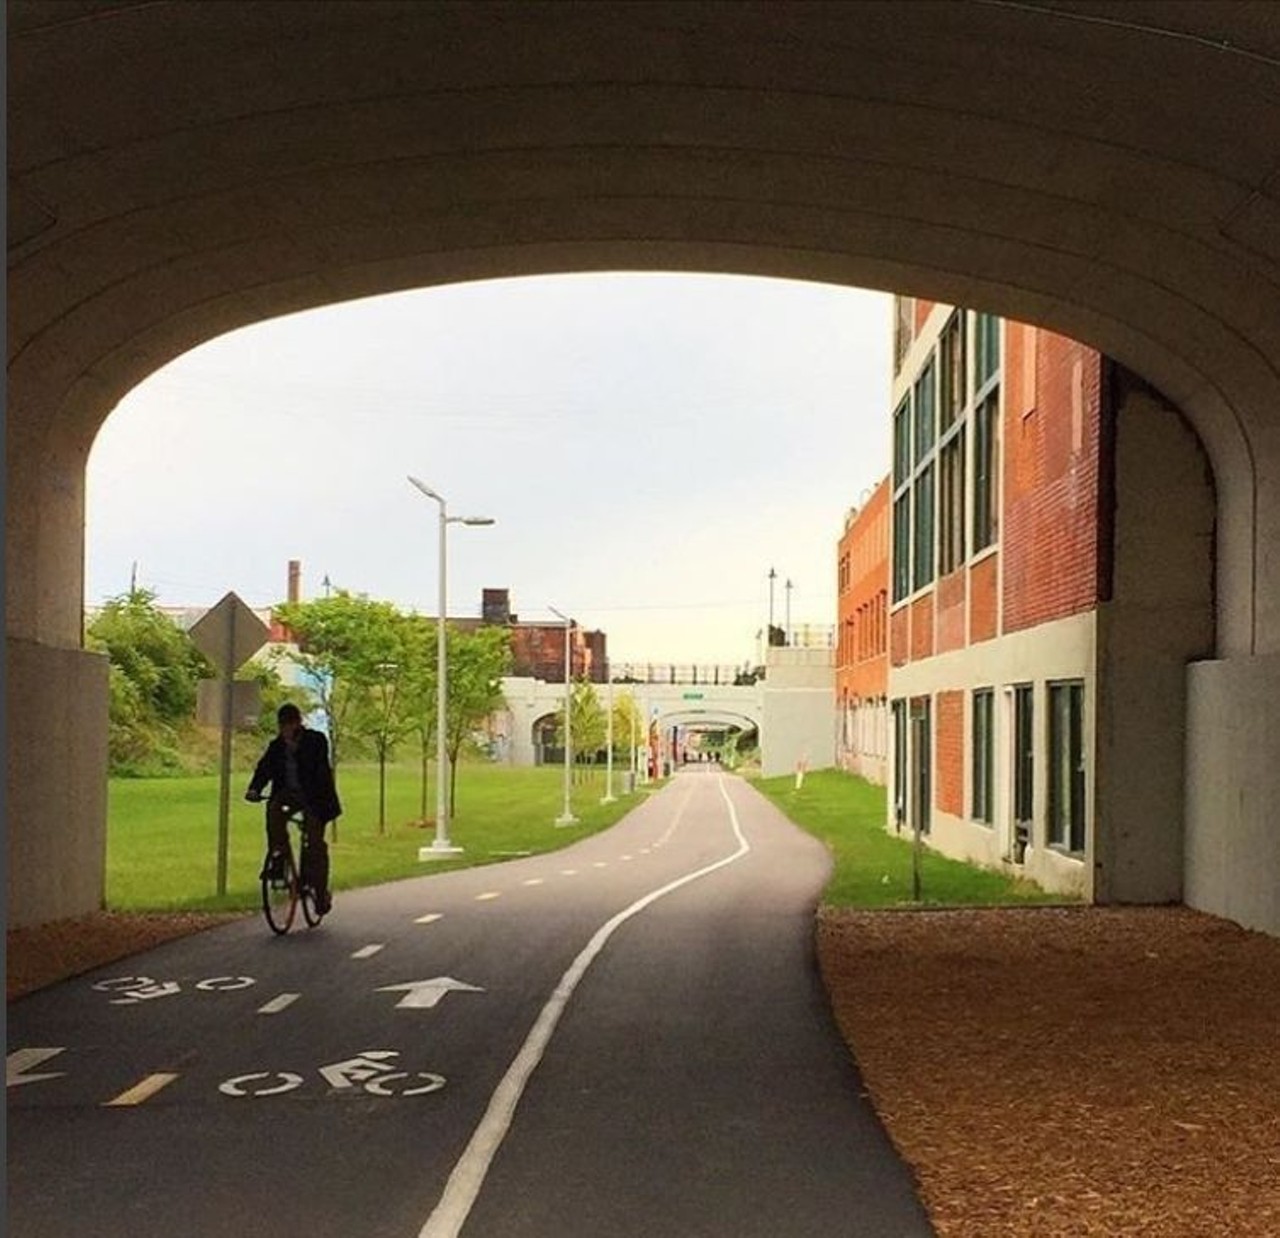  Dequindre Cut  
Whether you&#146;re biking or walking this scenic trail, it&#146;s a Detroit staple so you have to go at least once. Thankfully, it&#146;s just as beautiful when you go solo. 
Photo via Instagram, user DownWithDetroit 